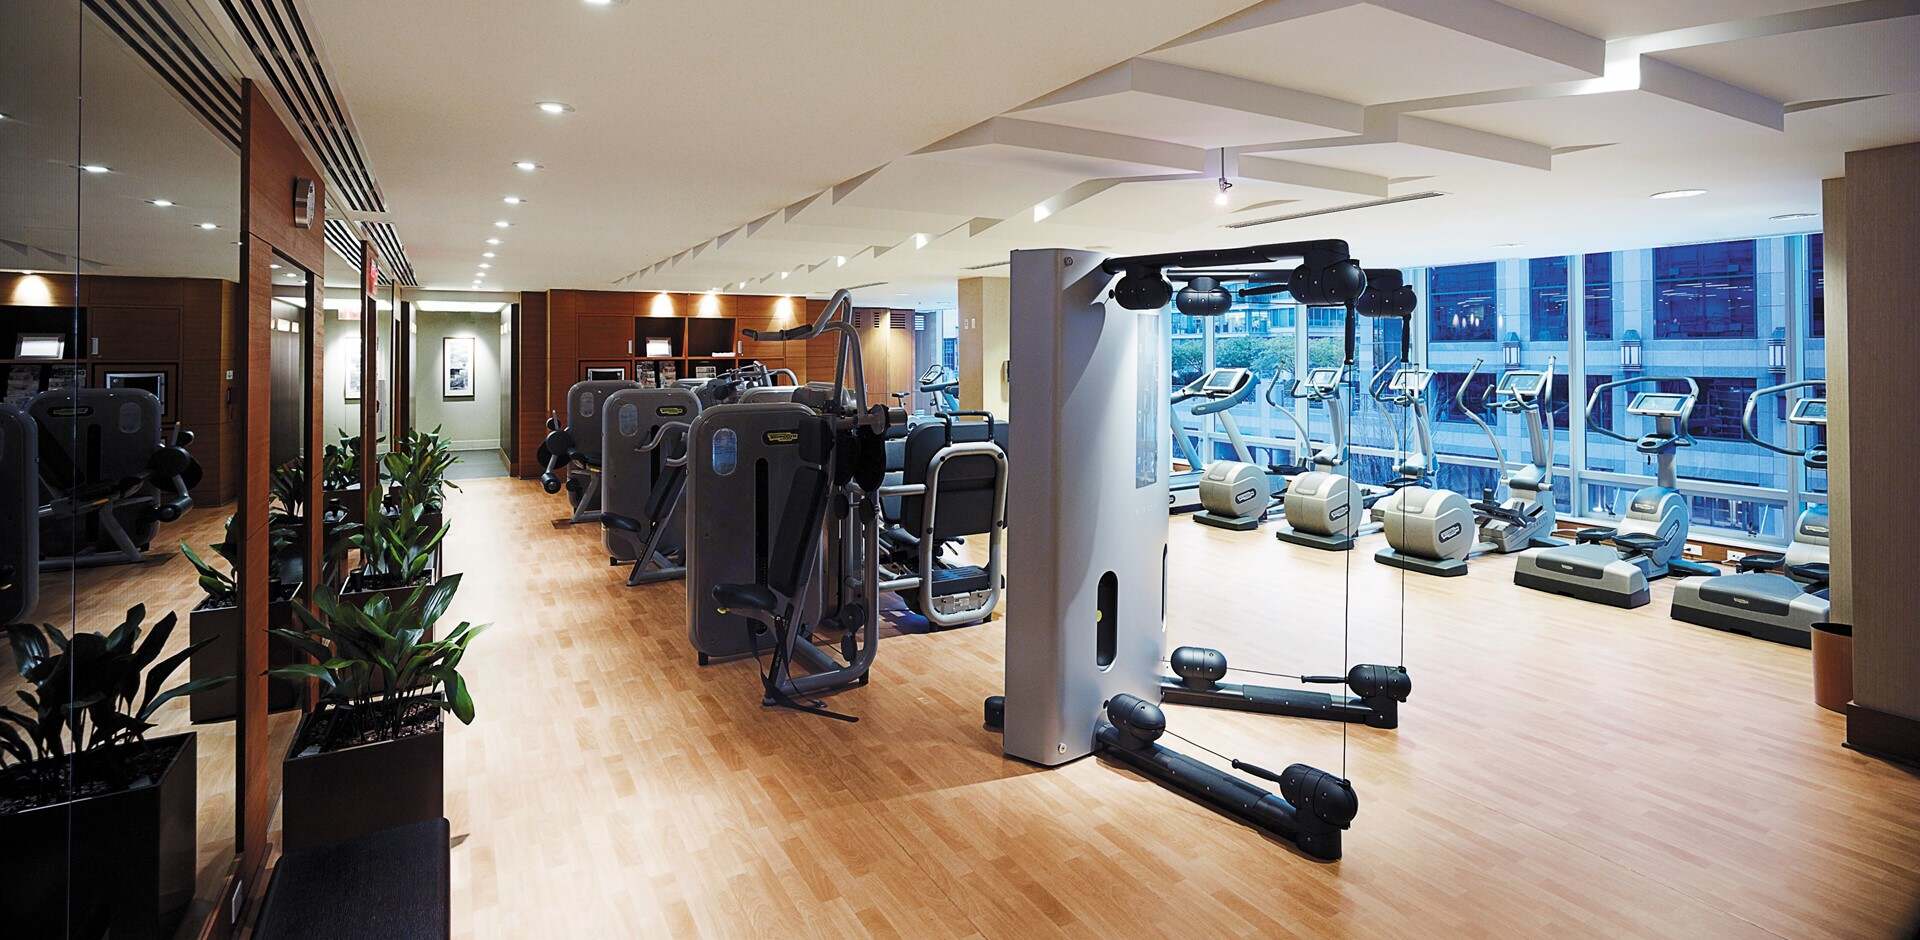 Fitness Center, Gym, Health Club In Vancouver｜Shangri-La Vancouver